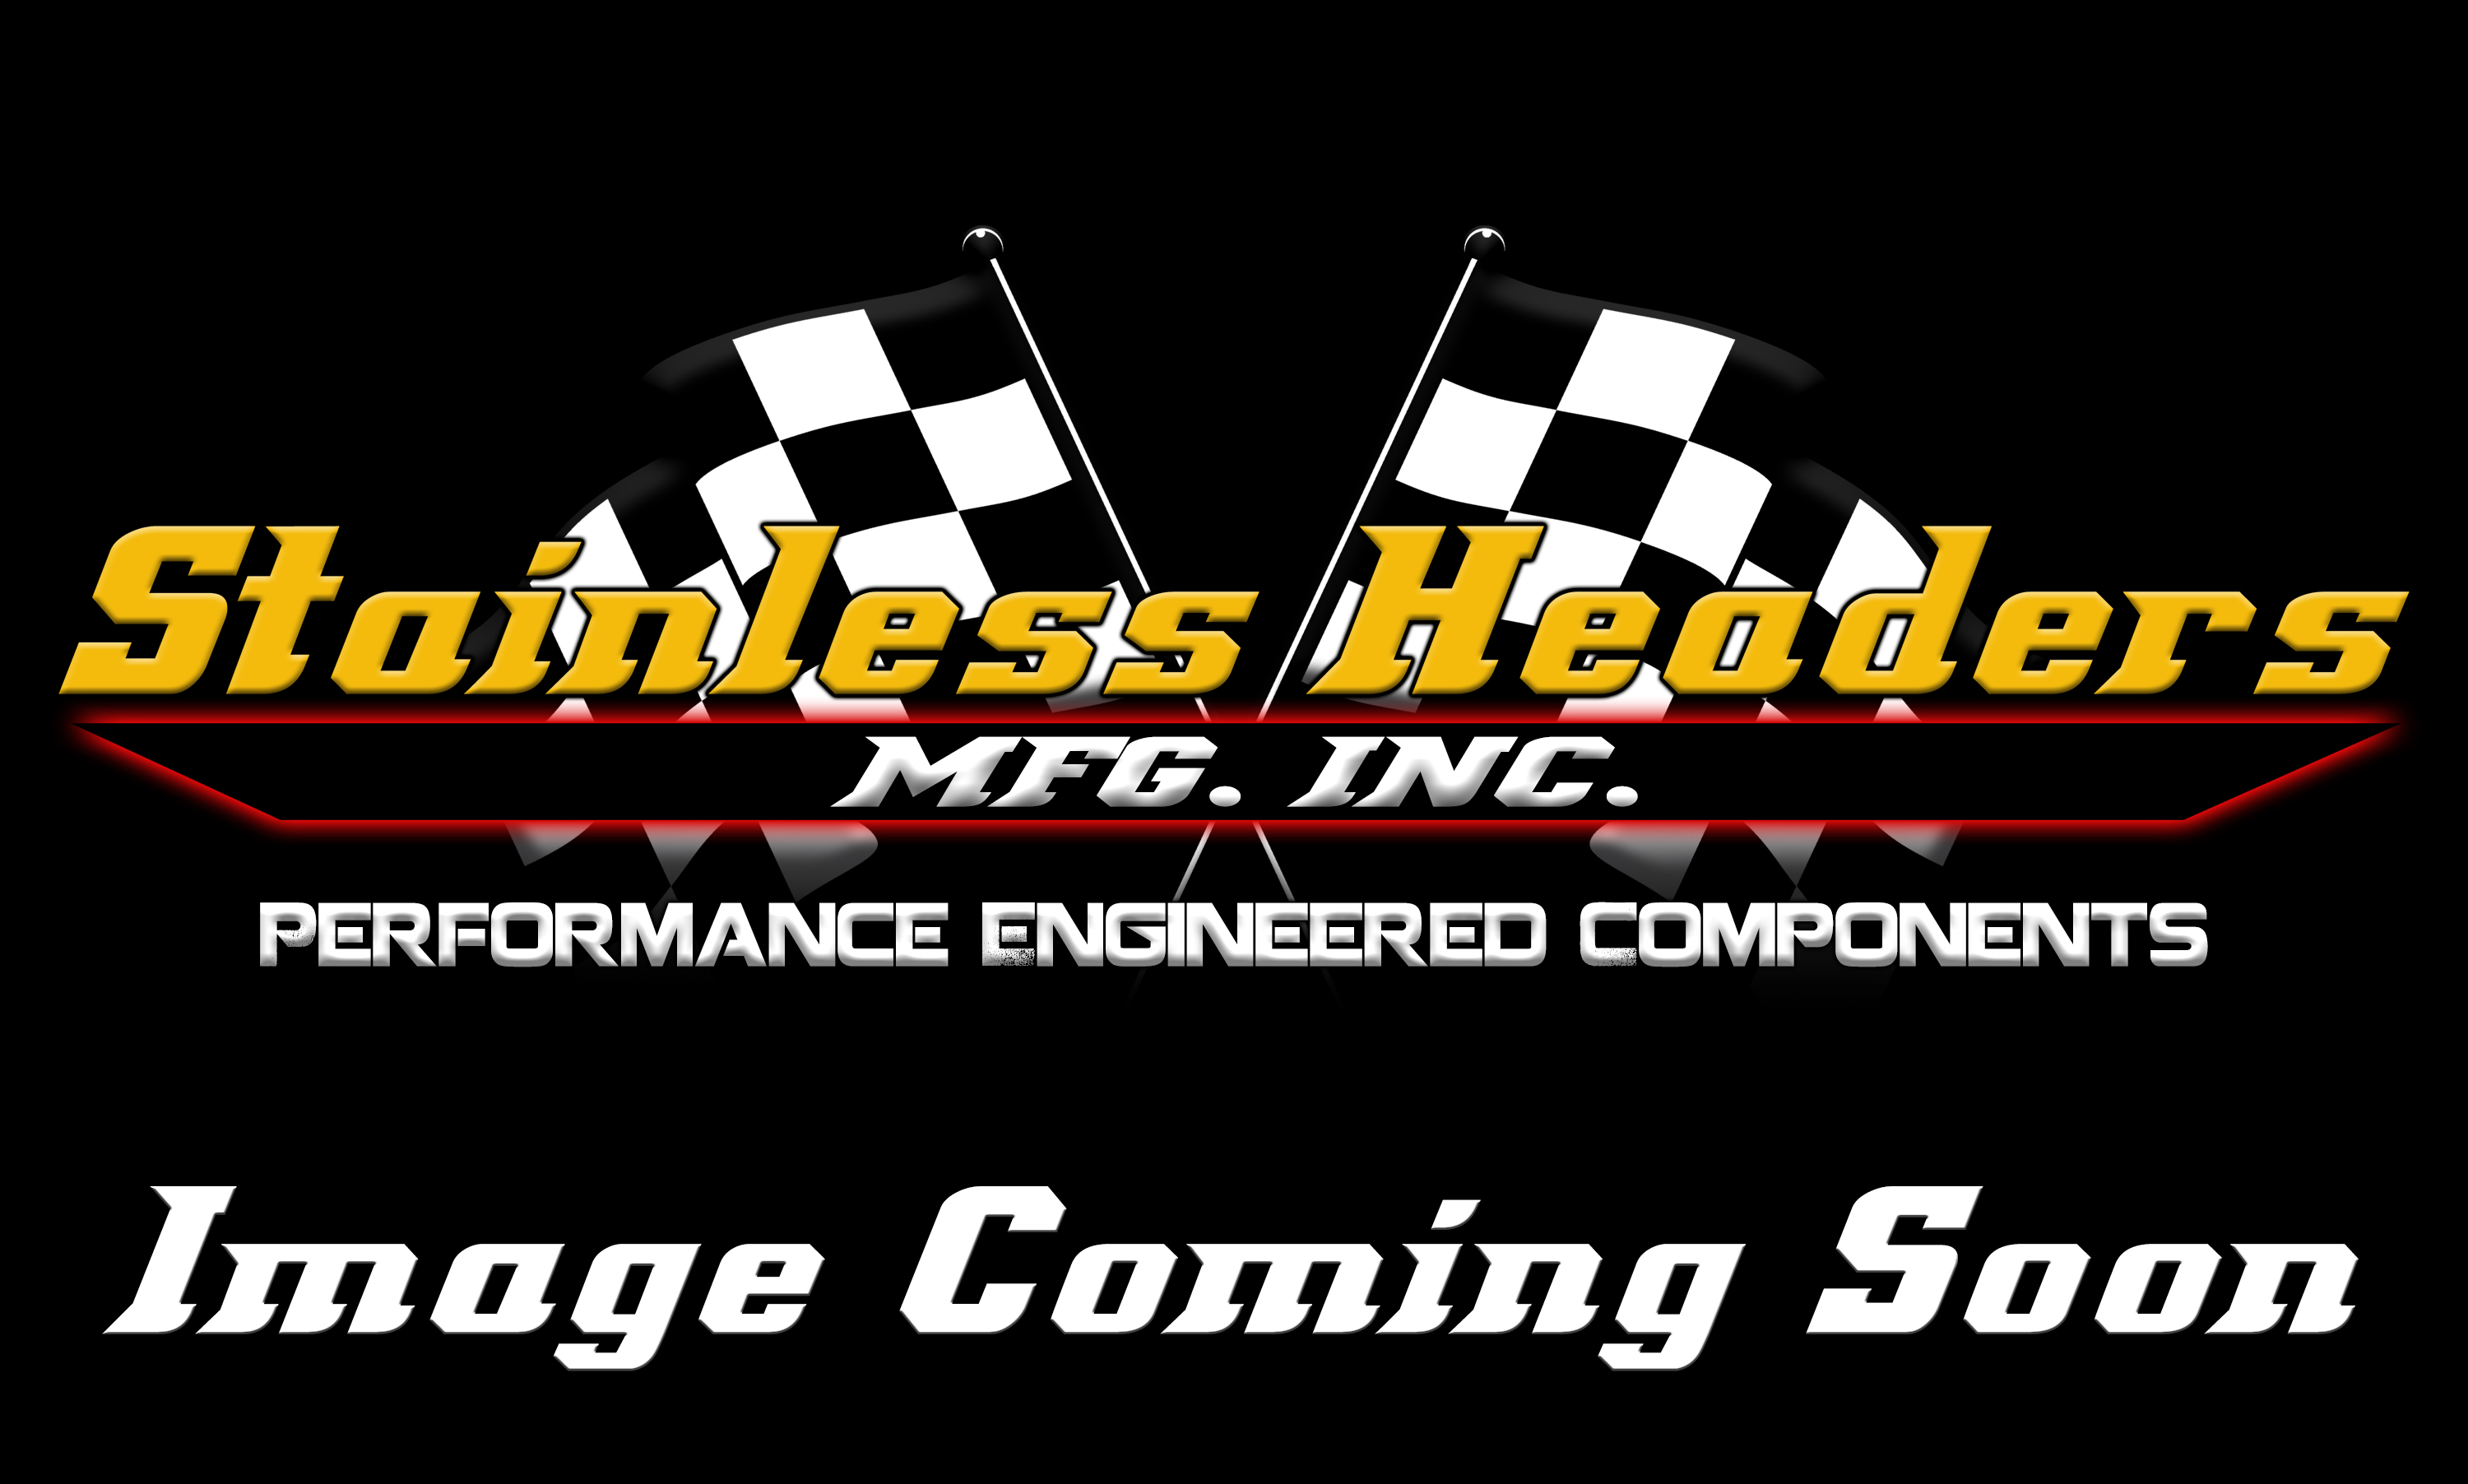 Stainless Headers - 1 5/8" Primary 6 into 1 Performance Merge Collector-16ga 304ss